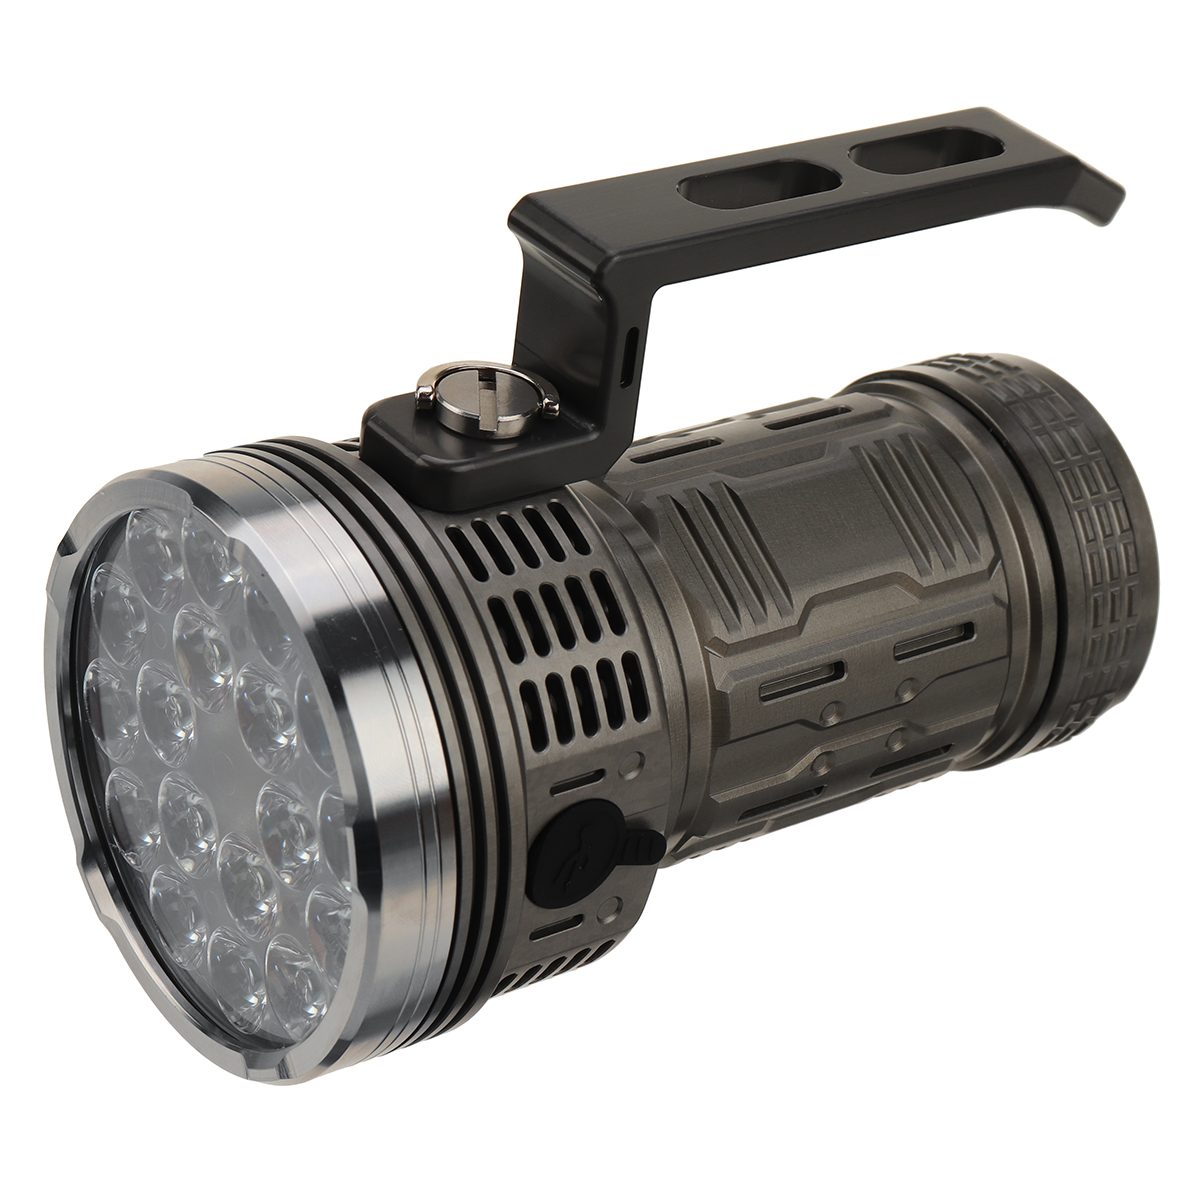 Astroluxreg-MF01X-Flashlight-Extended-Carrying-Handle--Nut-for-Astrolux-MF01XMF01SMF01-MF02SMF02-EC0-1930504-8